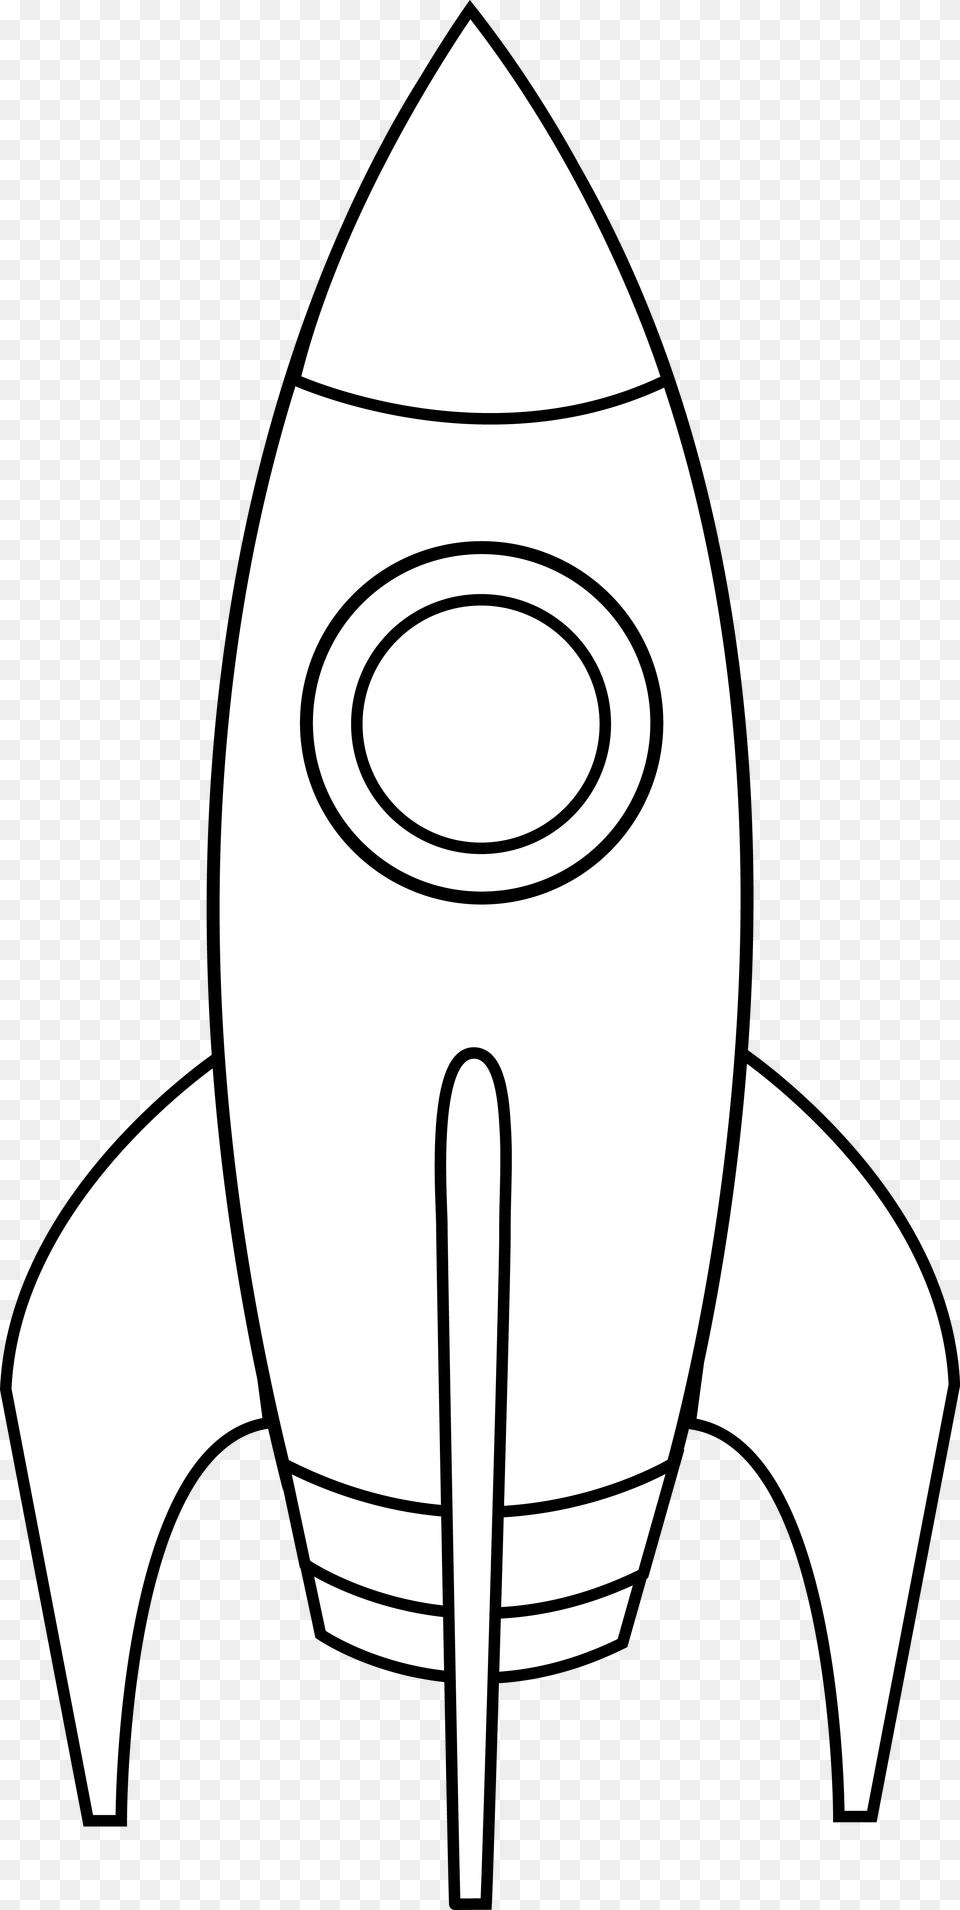 Cute Miniature Black And White Rocket Put Each Childs Face, Weapon Png Image